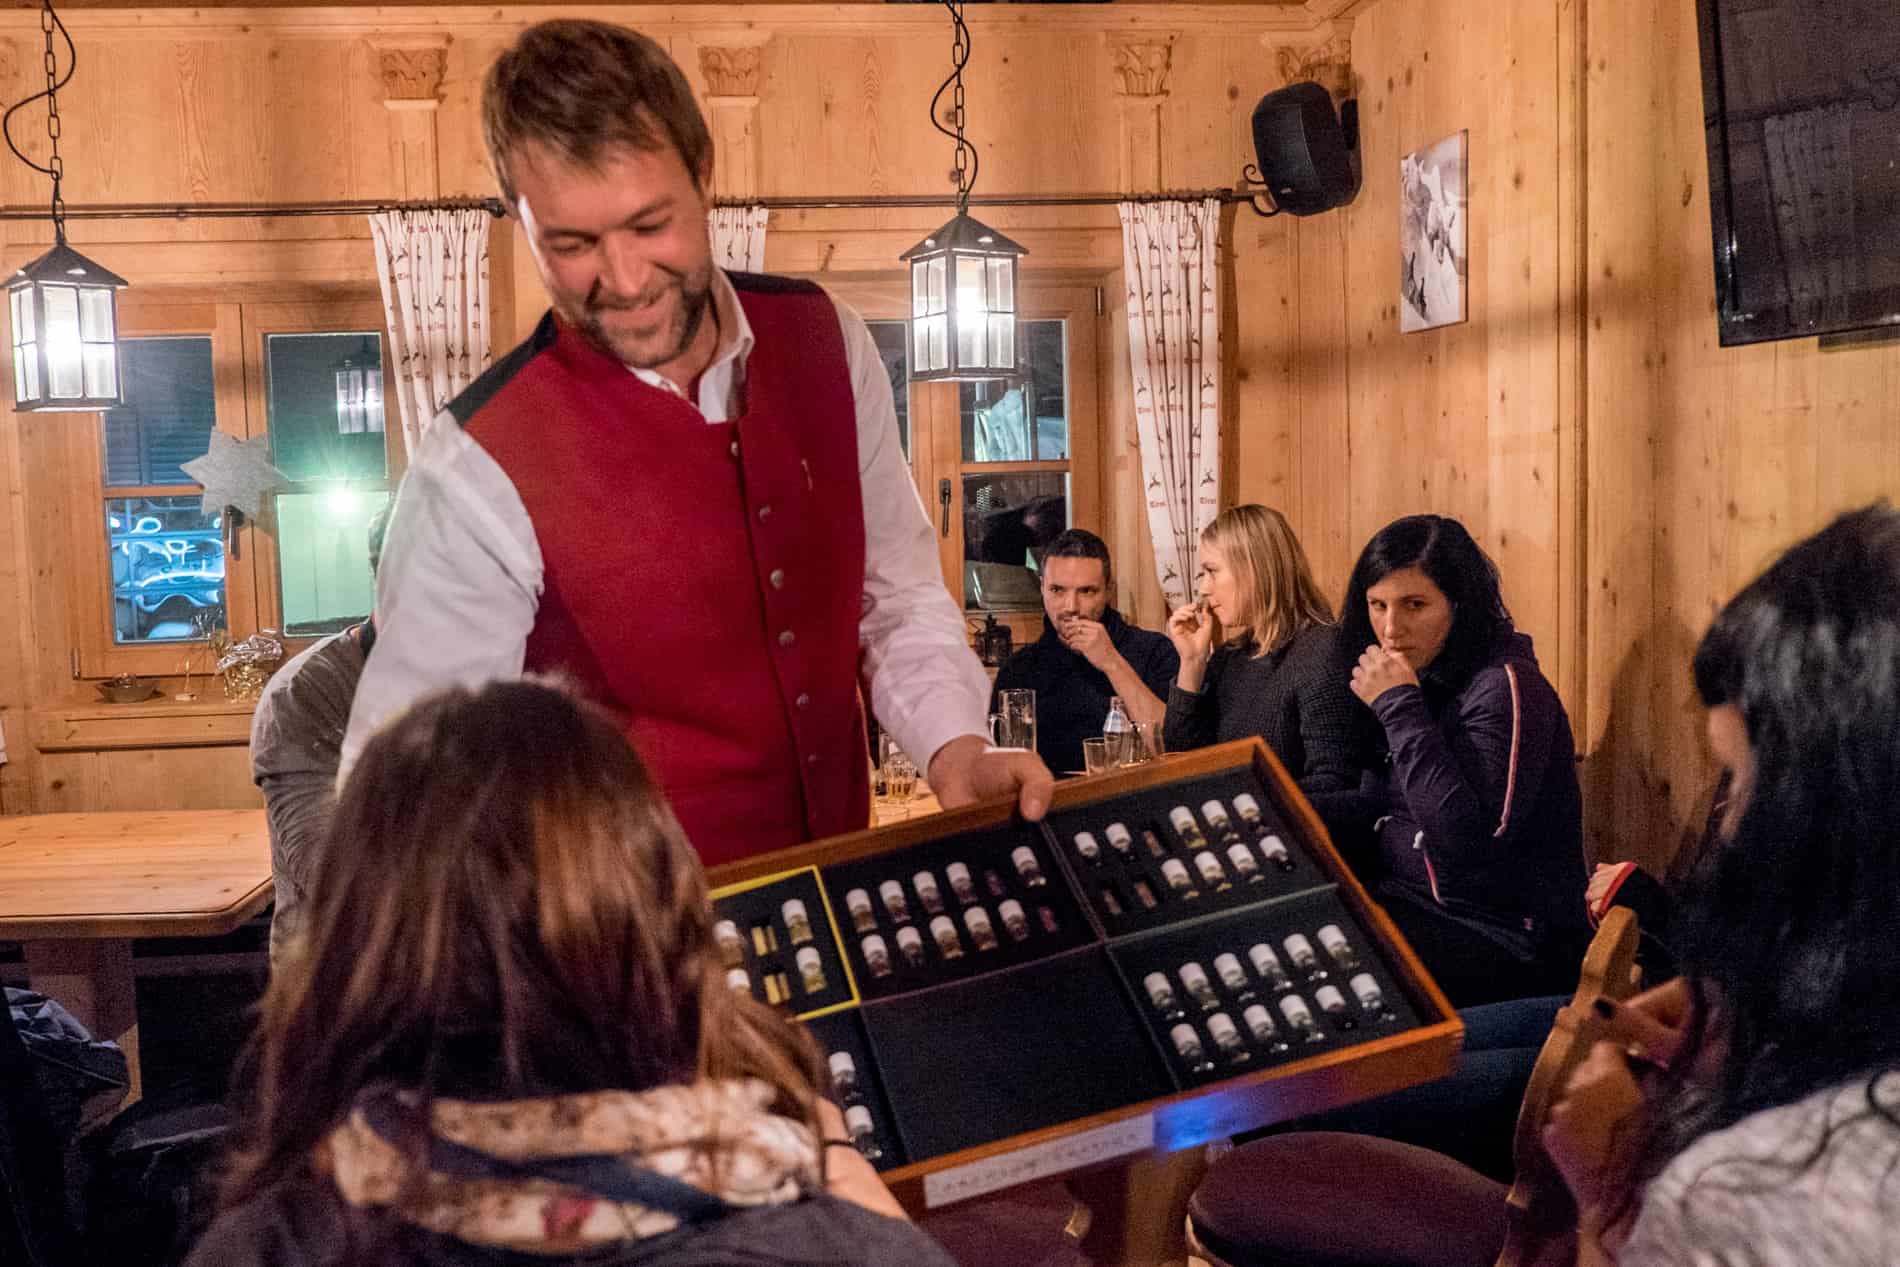 A group of people in a mountain hut being presented Scent Vials during Schnapps Tasting in Tirol Austria.